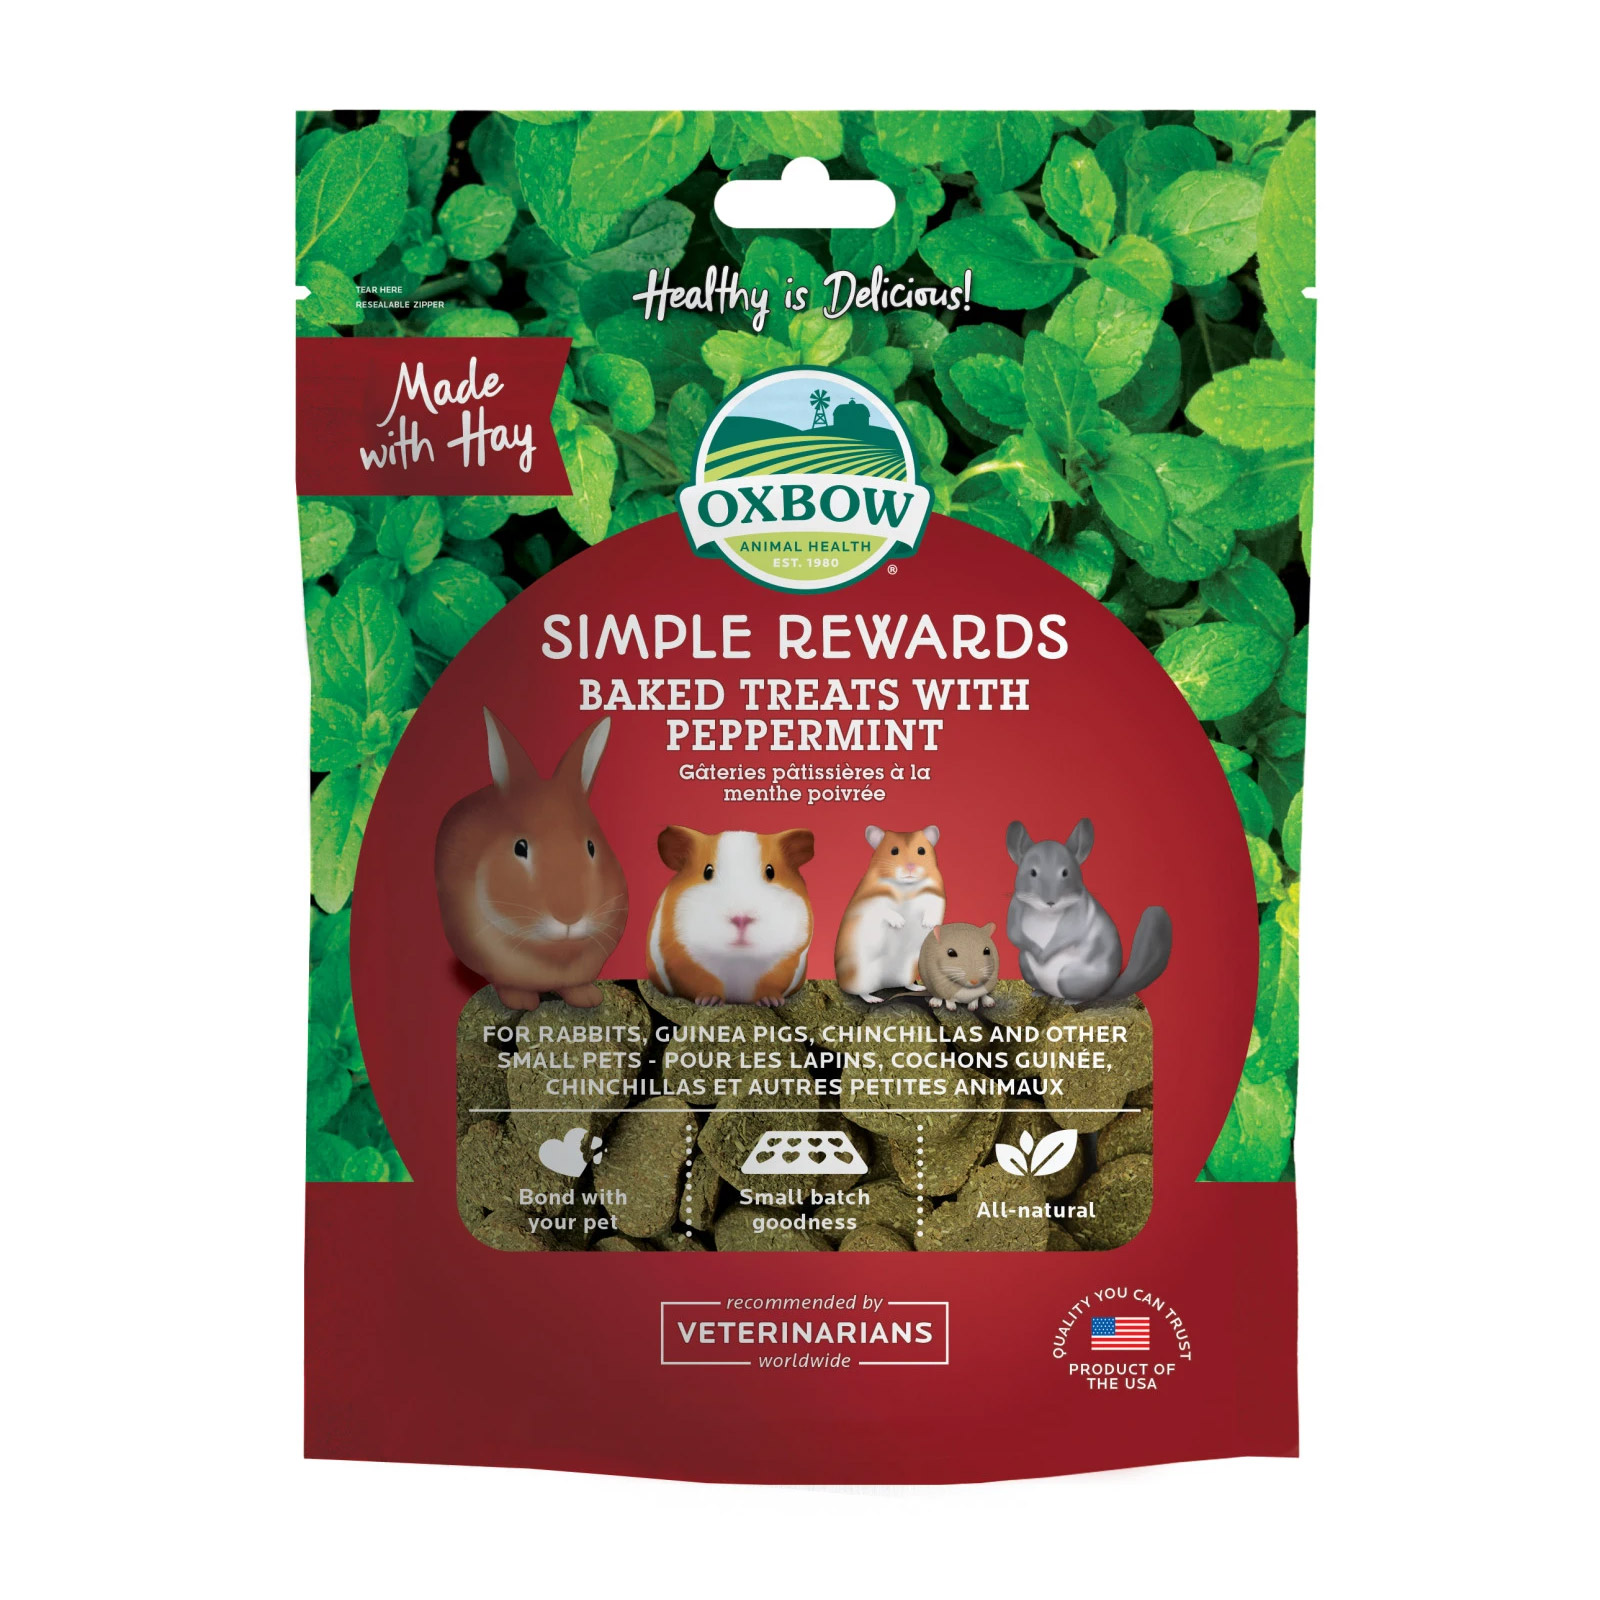 Oxbow Peppermint Treats for Dogs